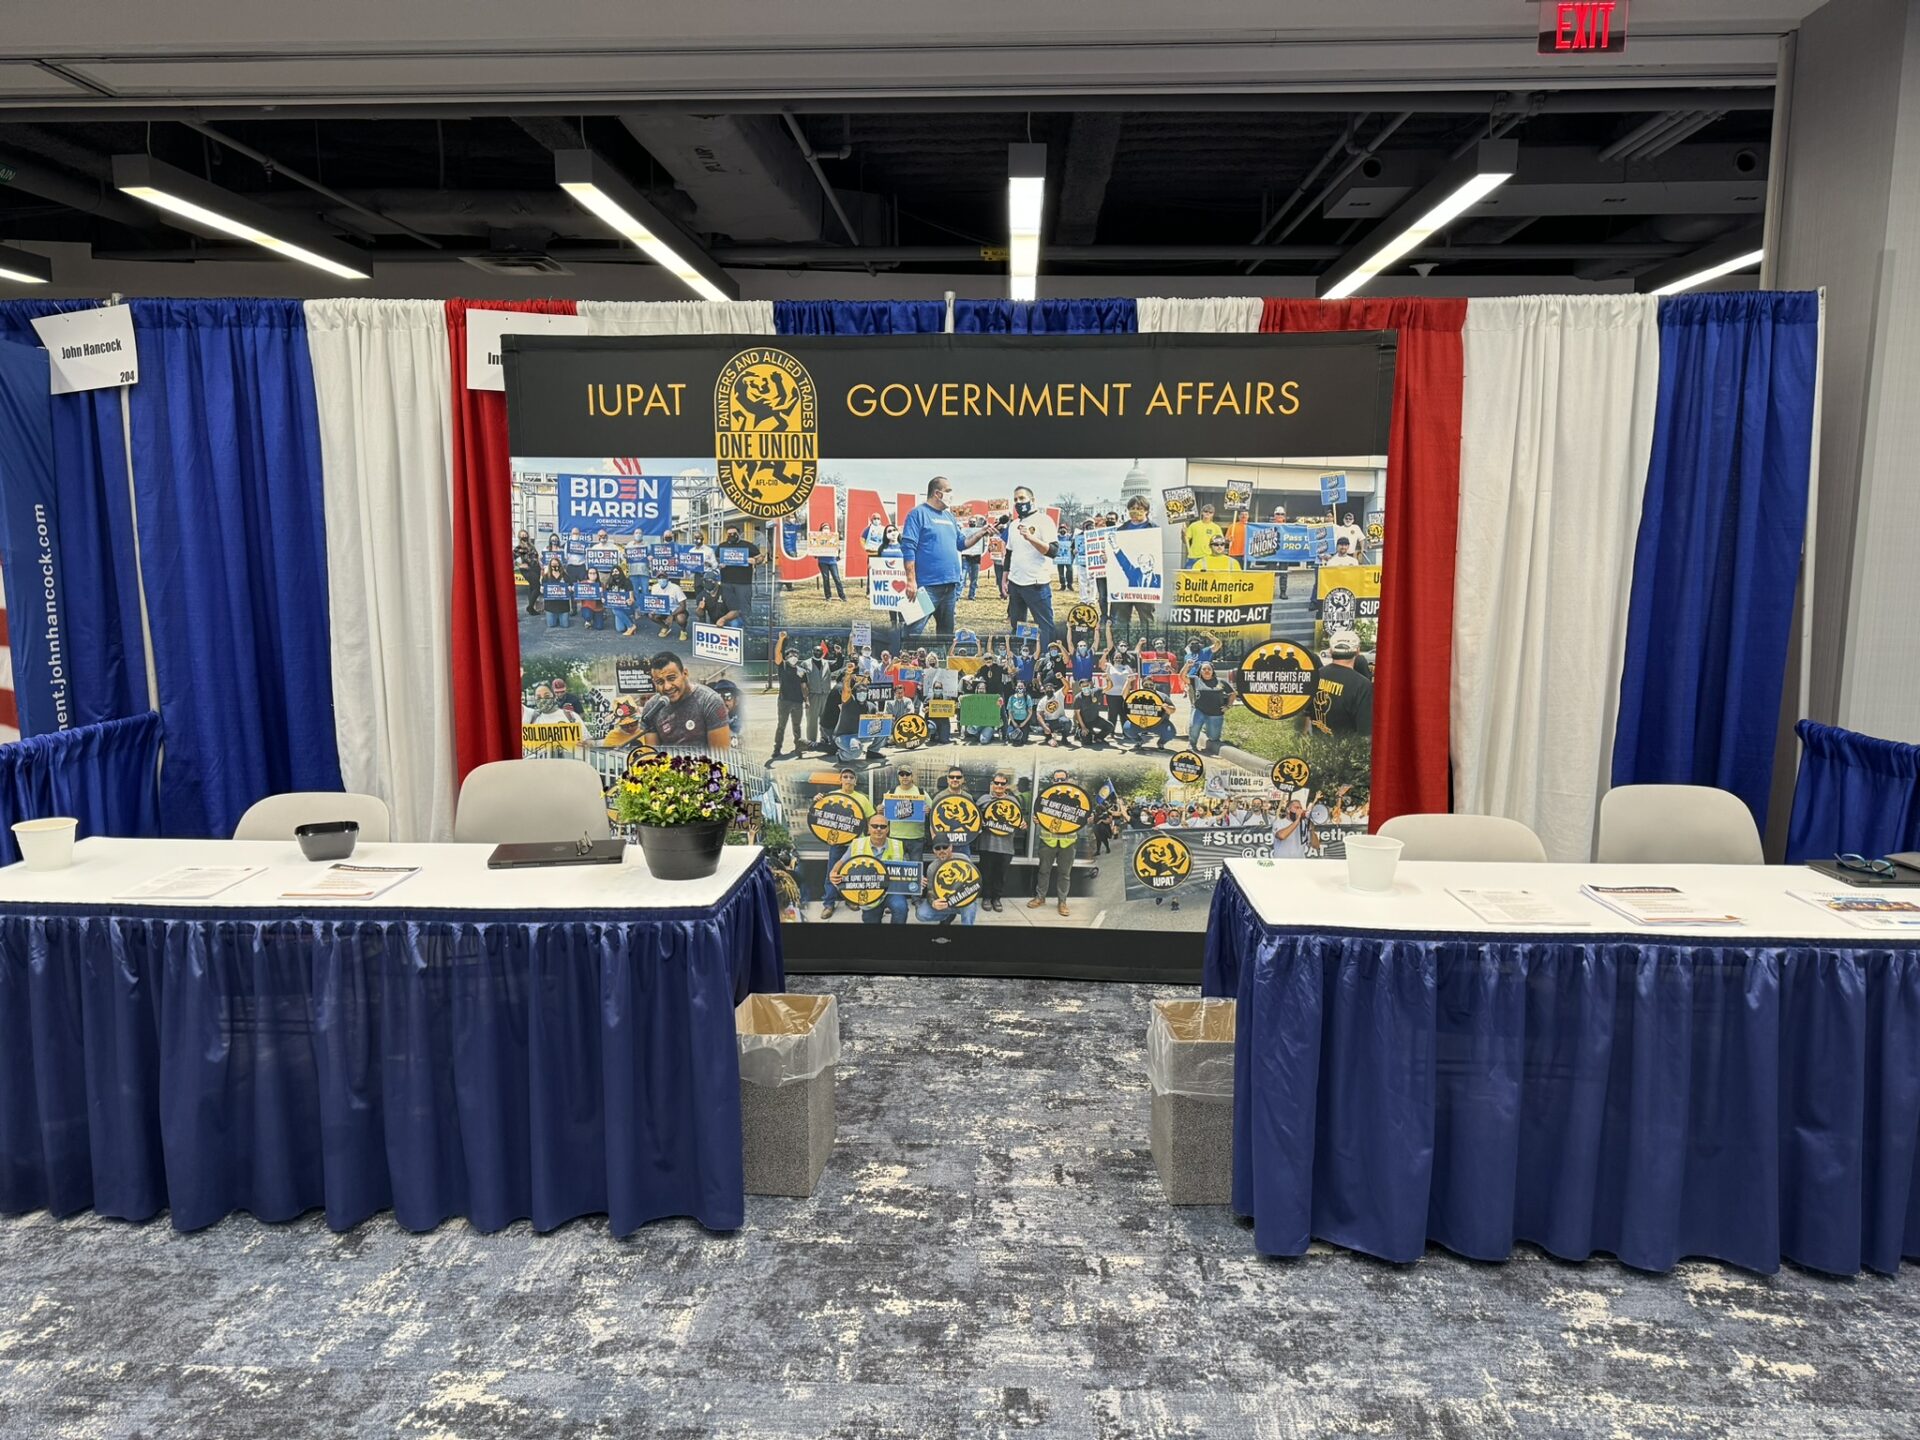 Image from the Gallery: North America’s Building Trades Unions (NABTU) Legislative Conference